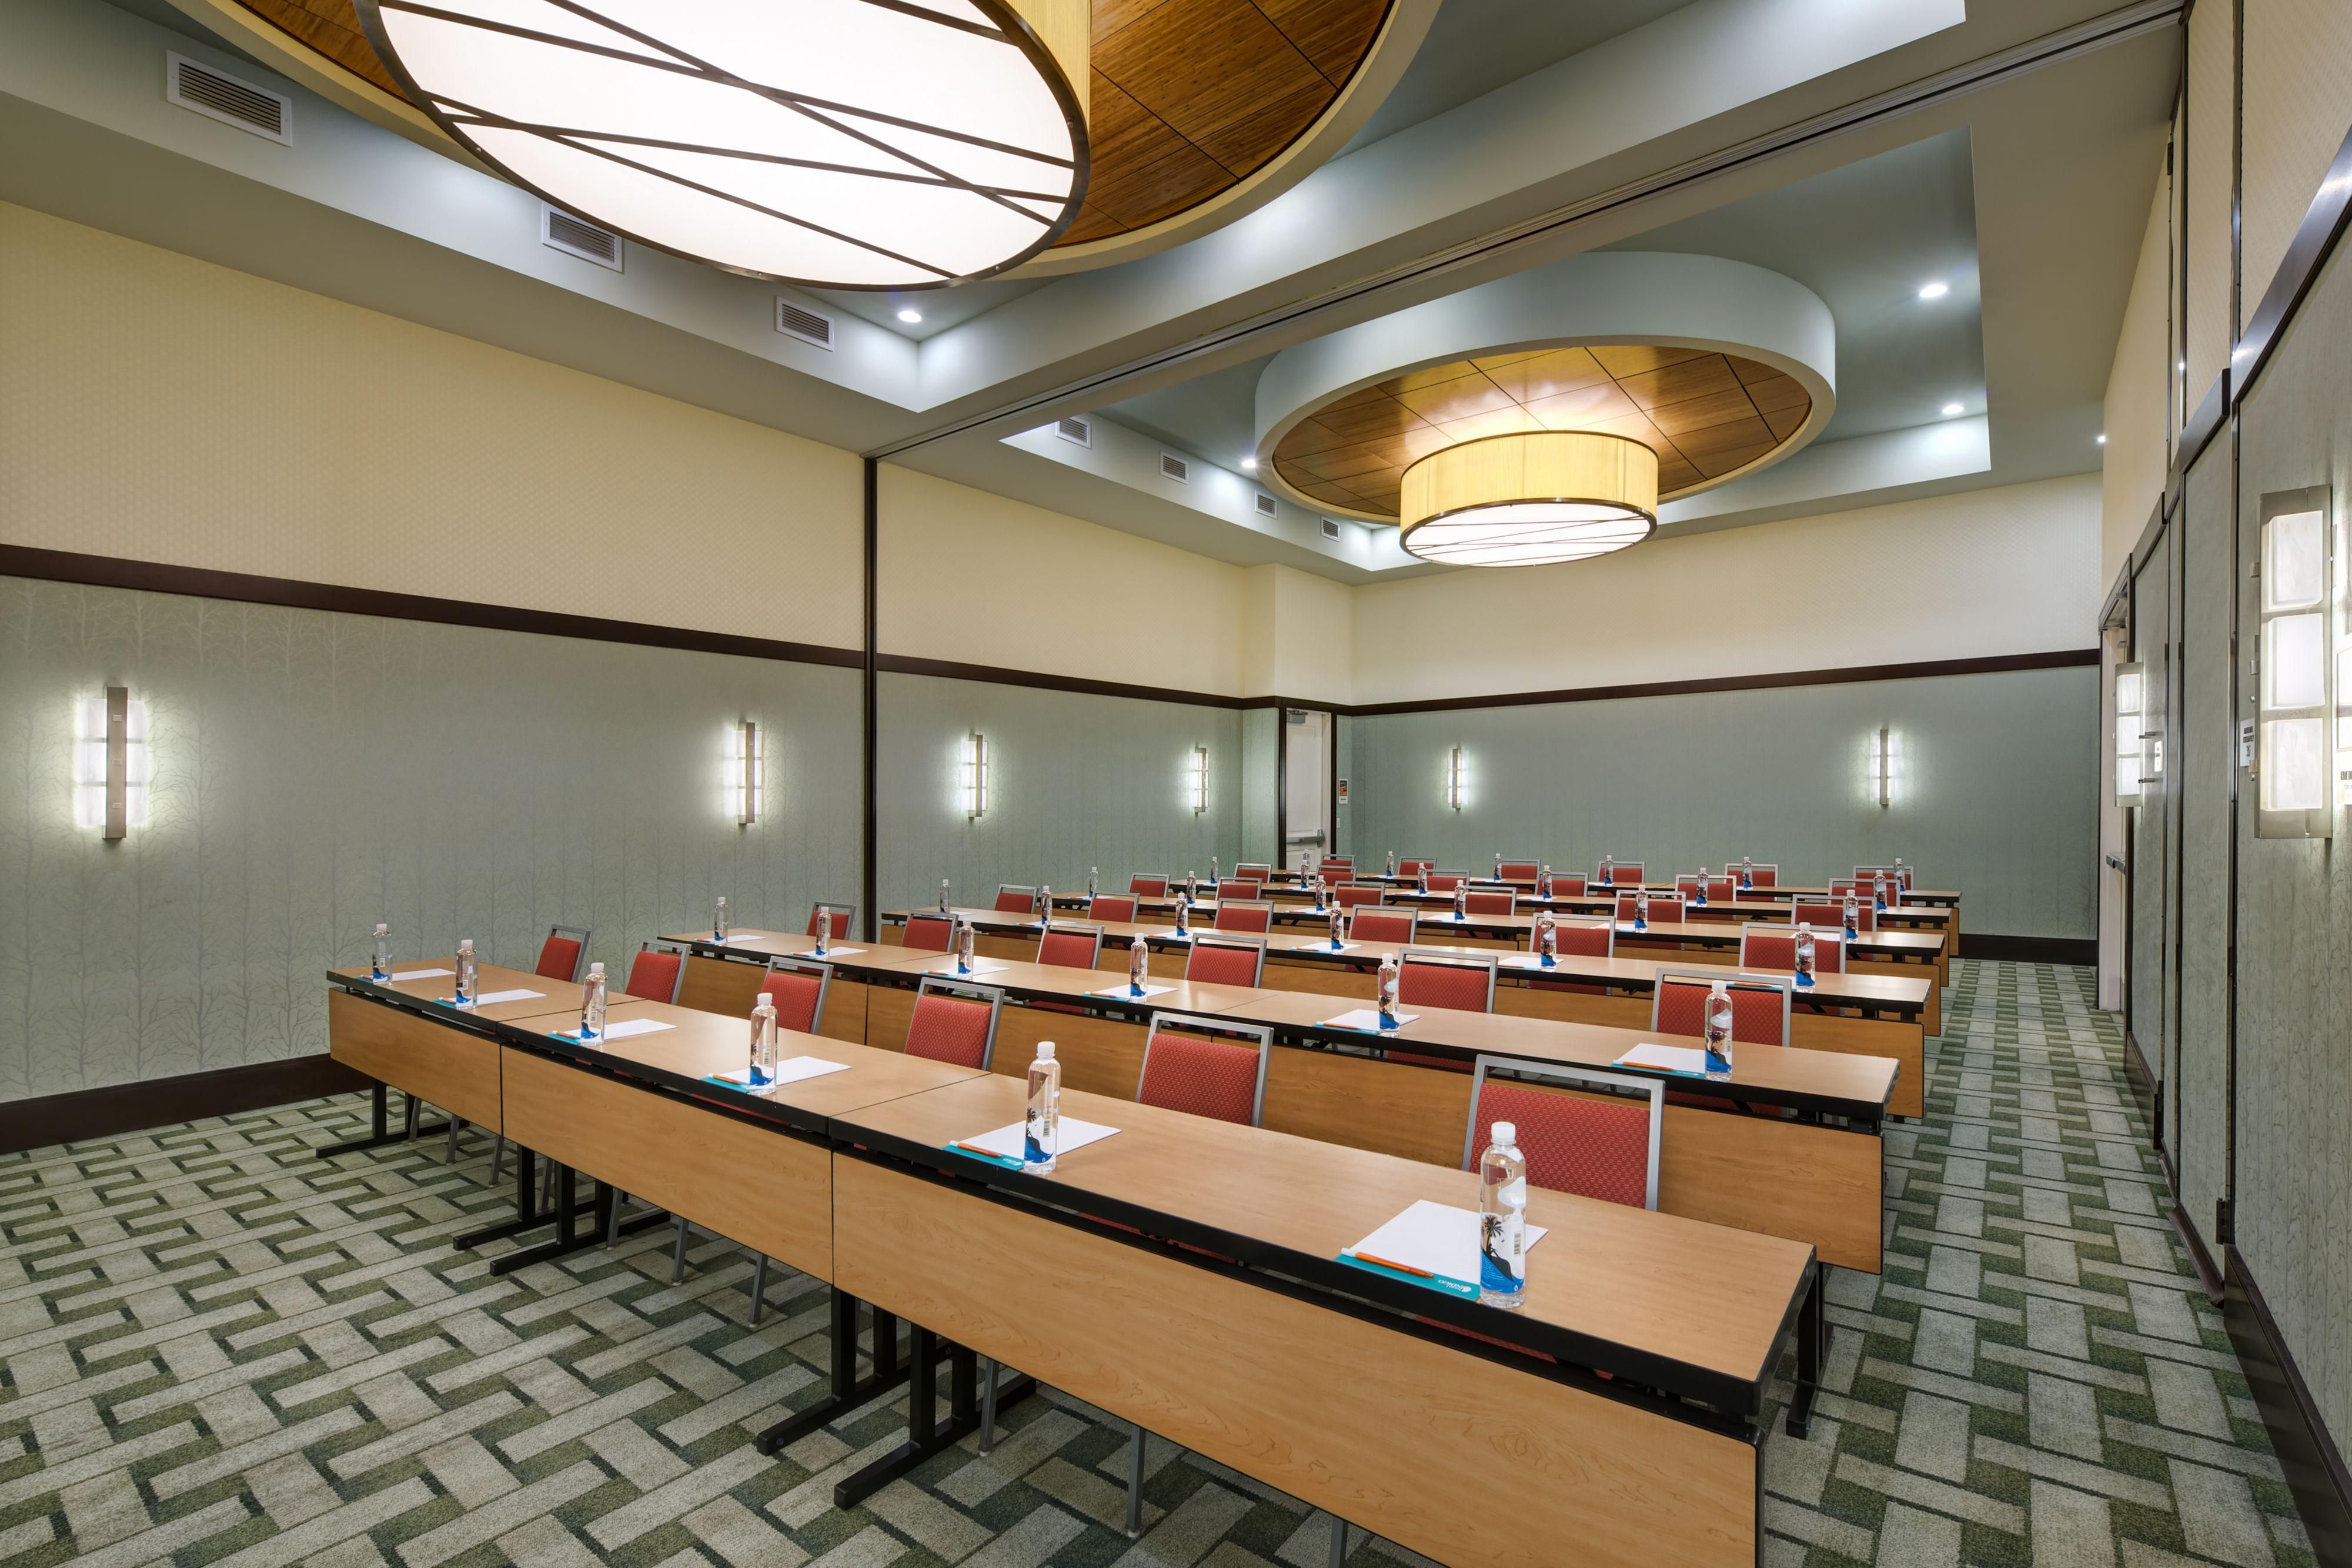 At 1,000 square feet, the Fibonacci Rooms feature lecture hall seating, large desk spaces, and a common area for refreshments. The ideal space for presentations and info sessions.